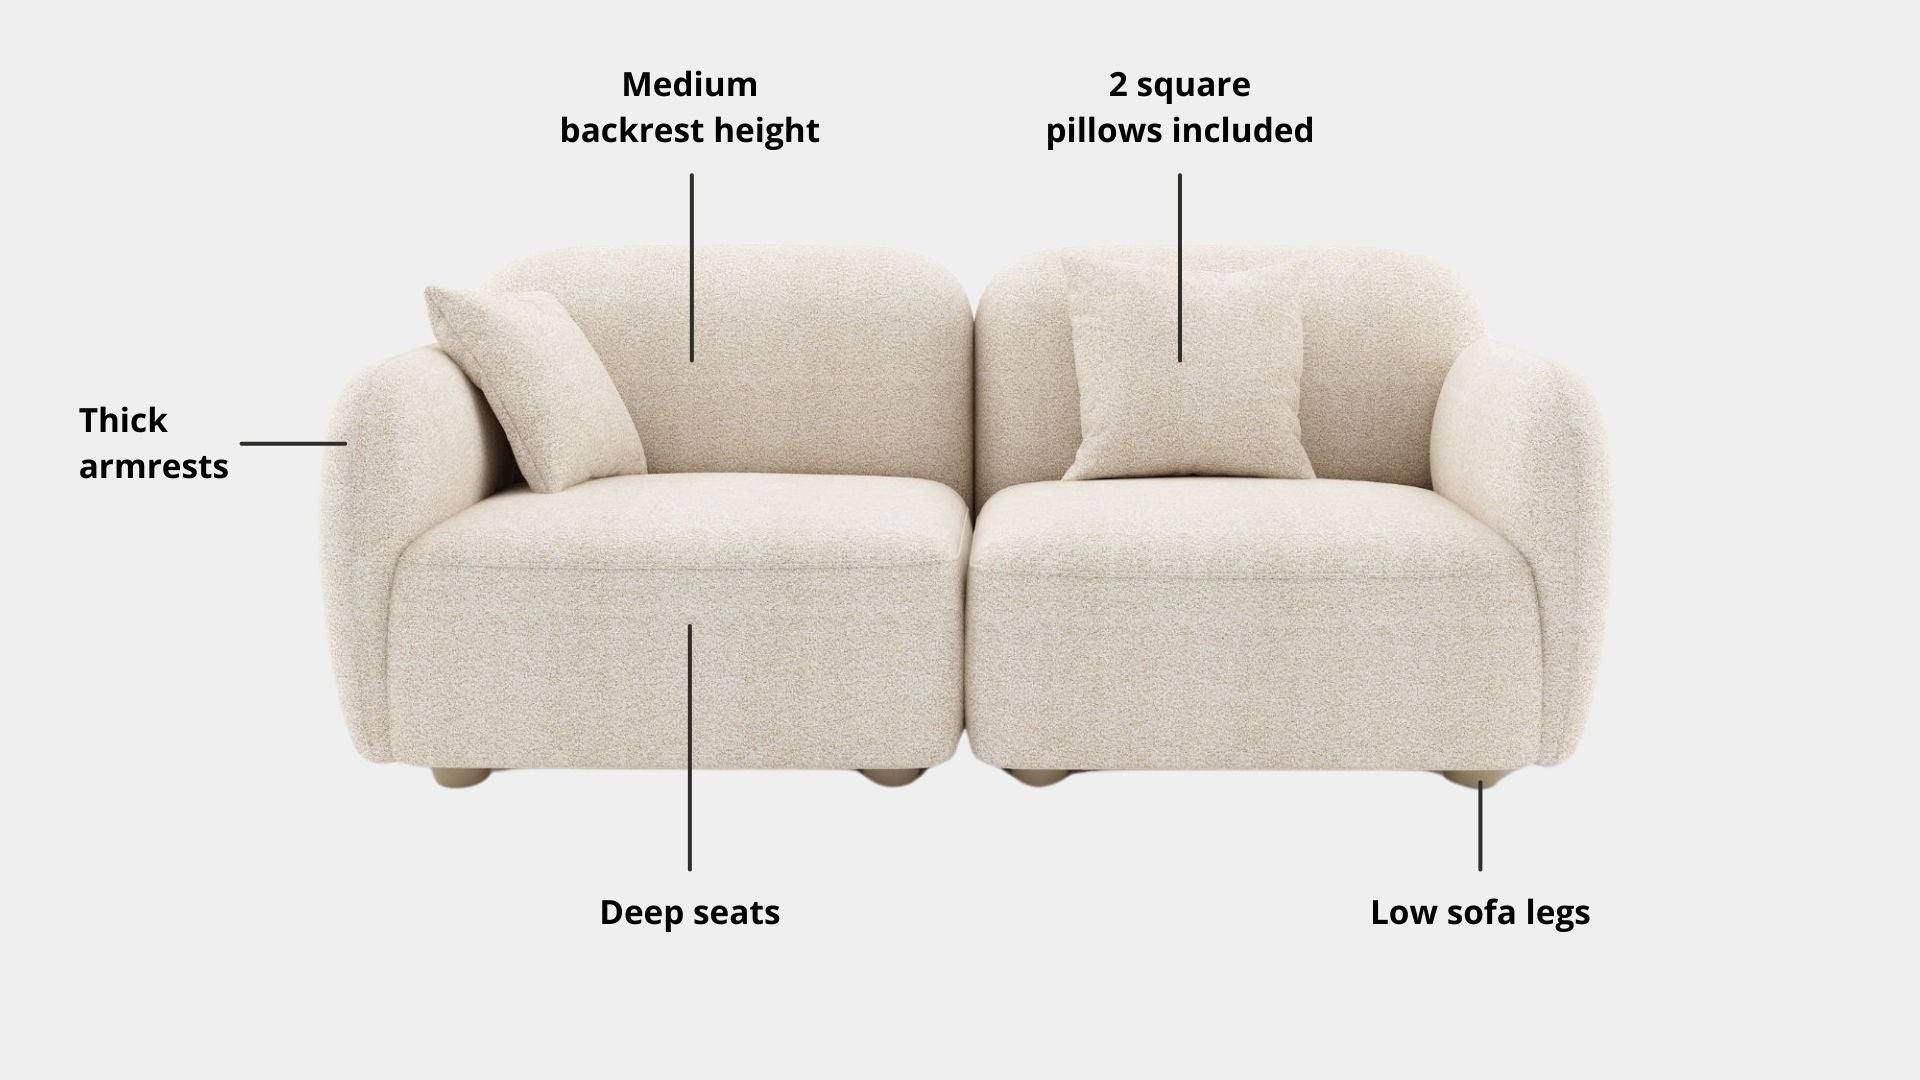 Key features such as armrest thickness, cushion height, seat depth and sofa leg height for Charmy Fabric Sofa